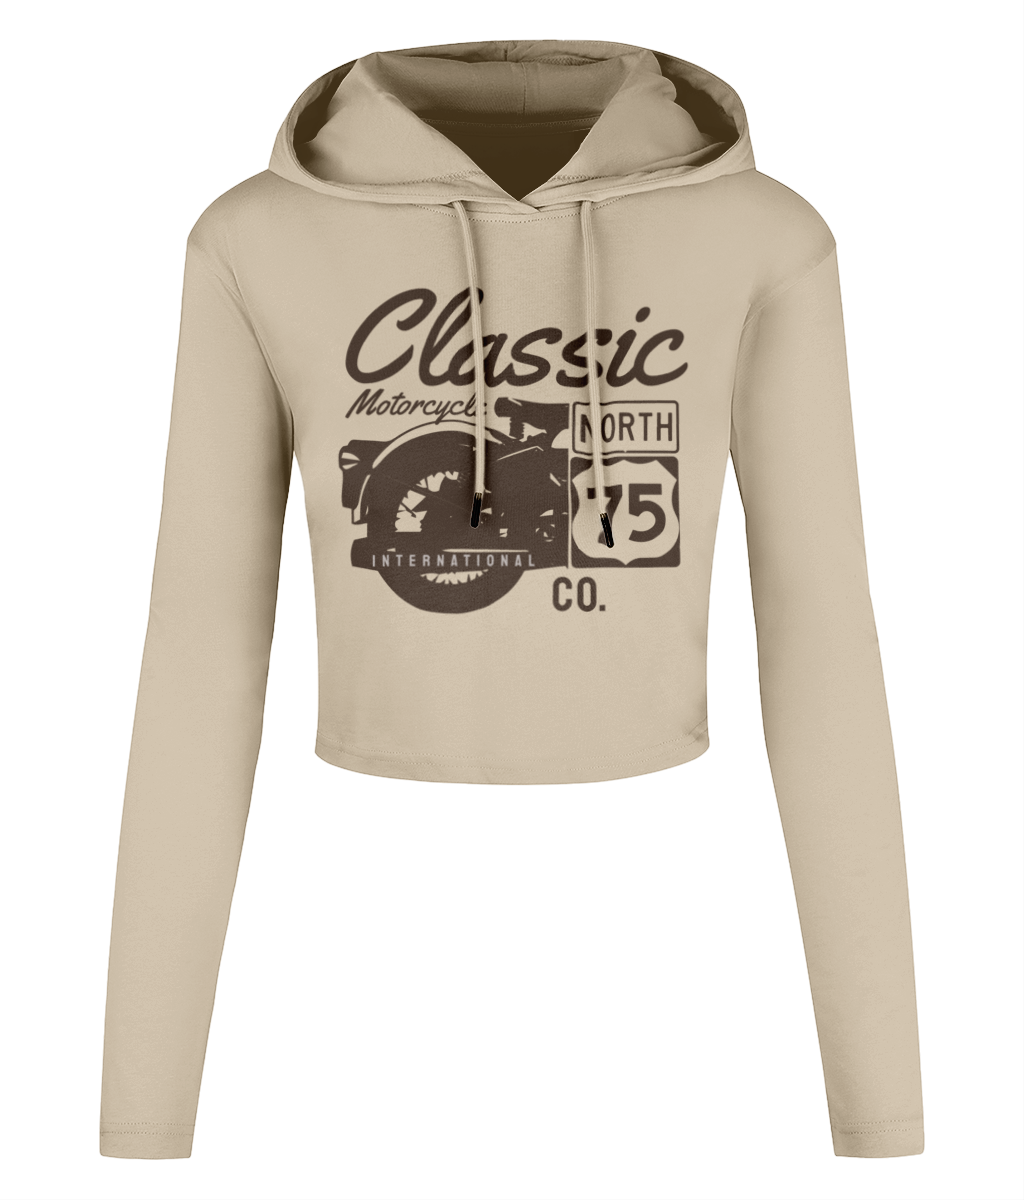 Classic Motorcycle 75 Black – Women’s Cropped Hooded T-shirt